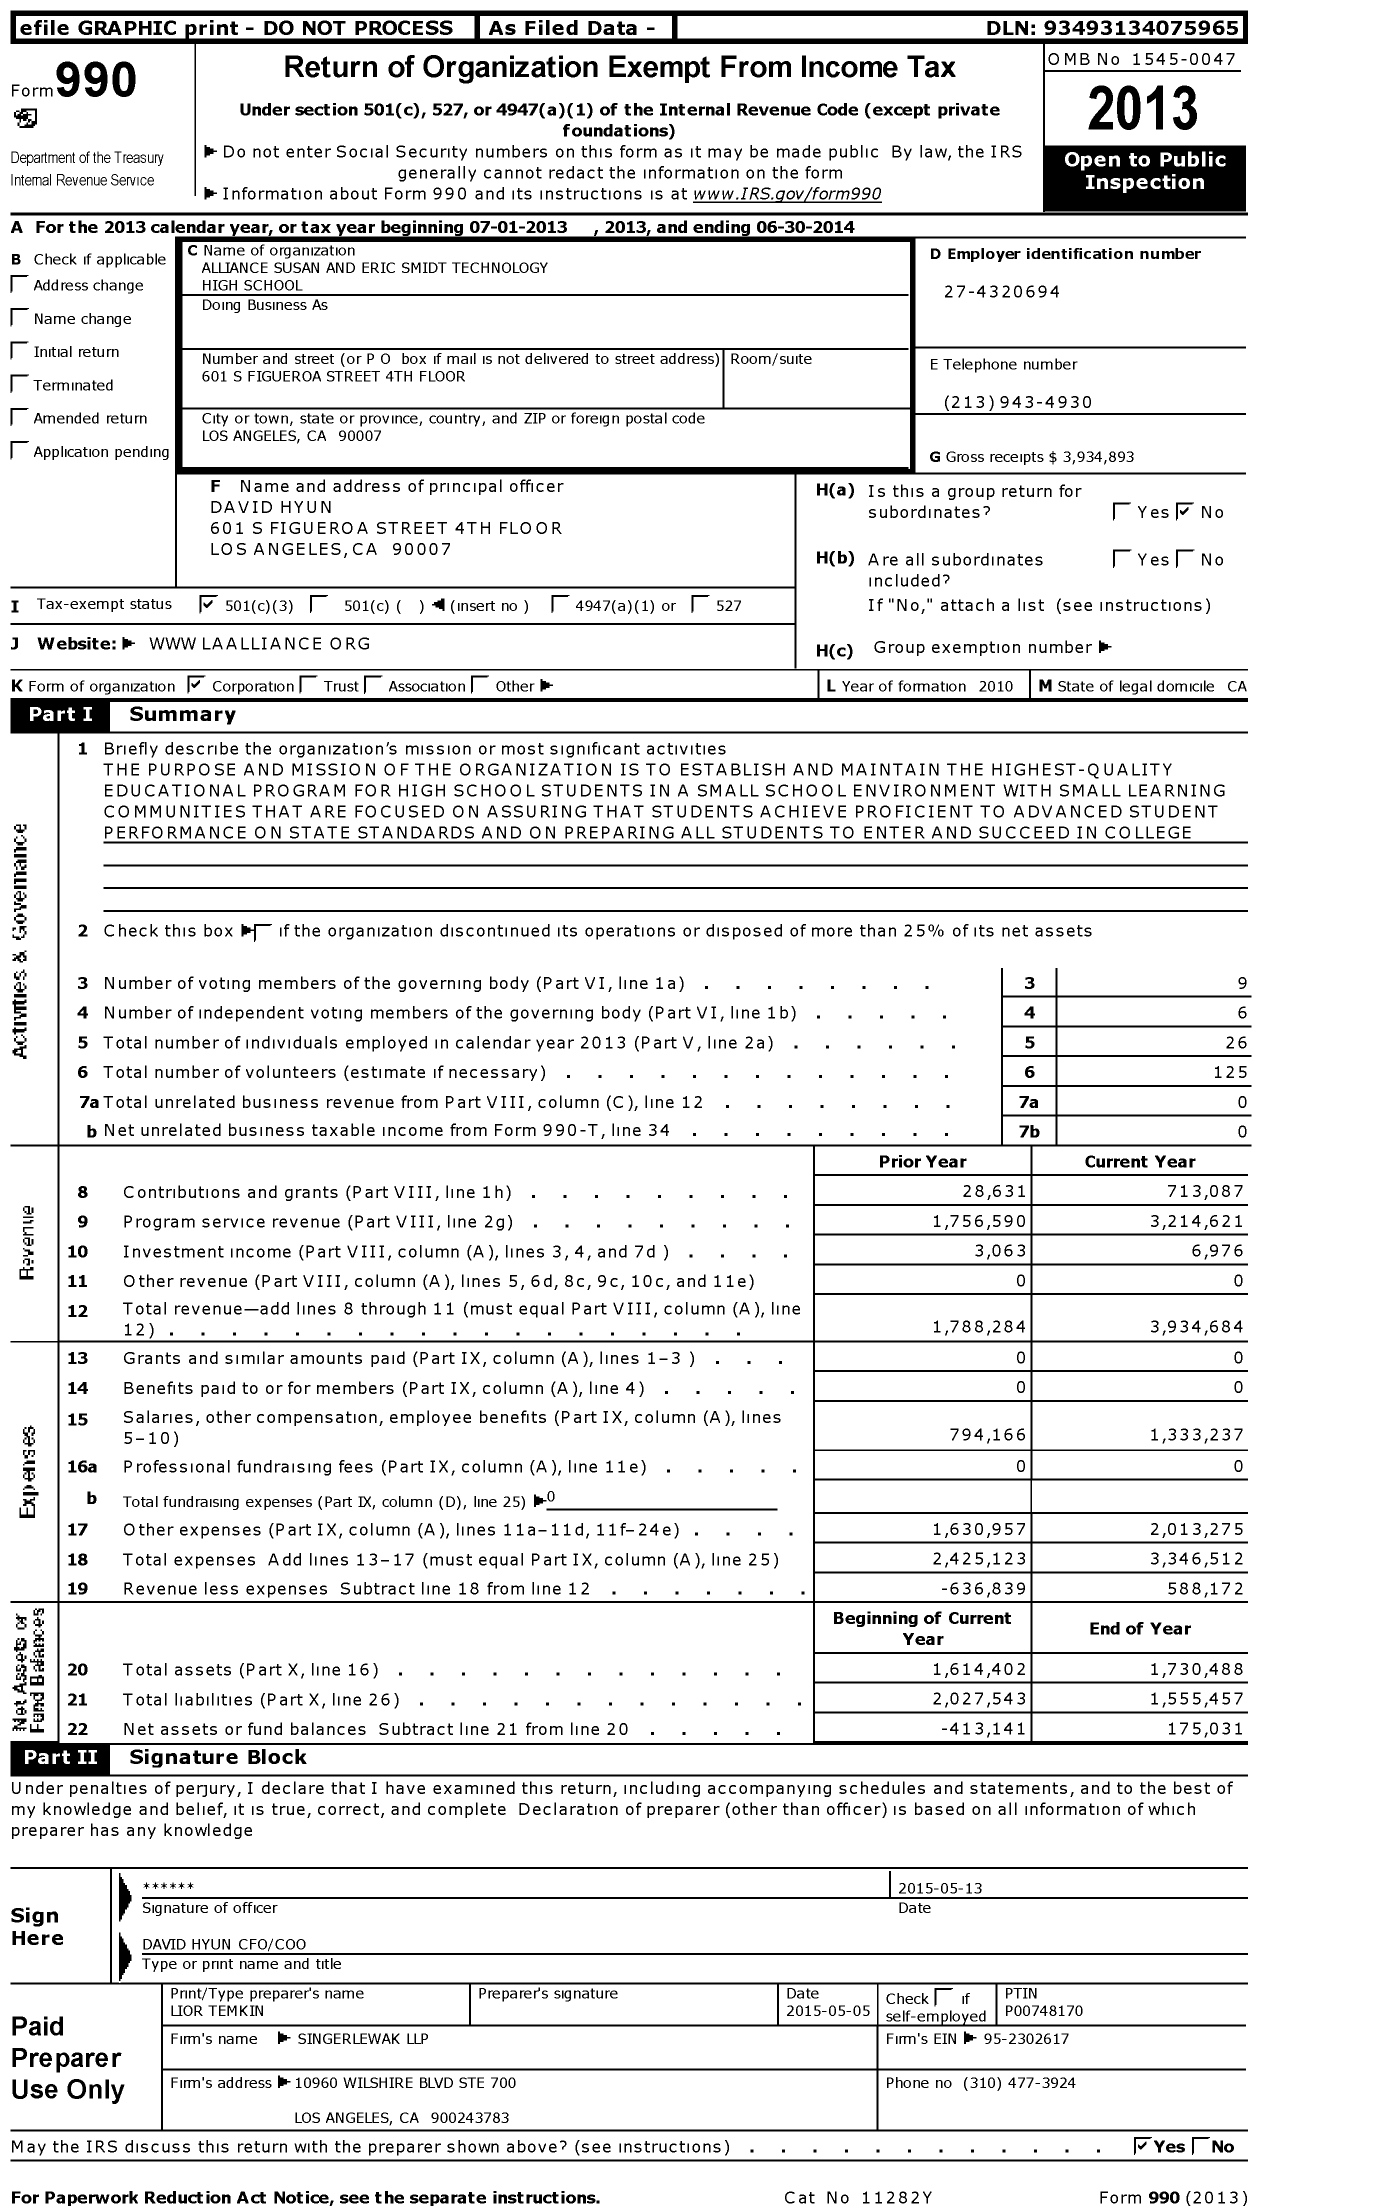 Image of first page of 2013 Form 990 for Alliance Susan and Eric Smidt Technology